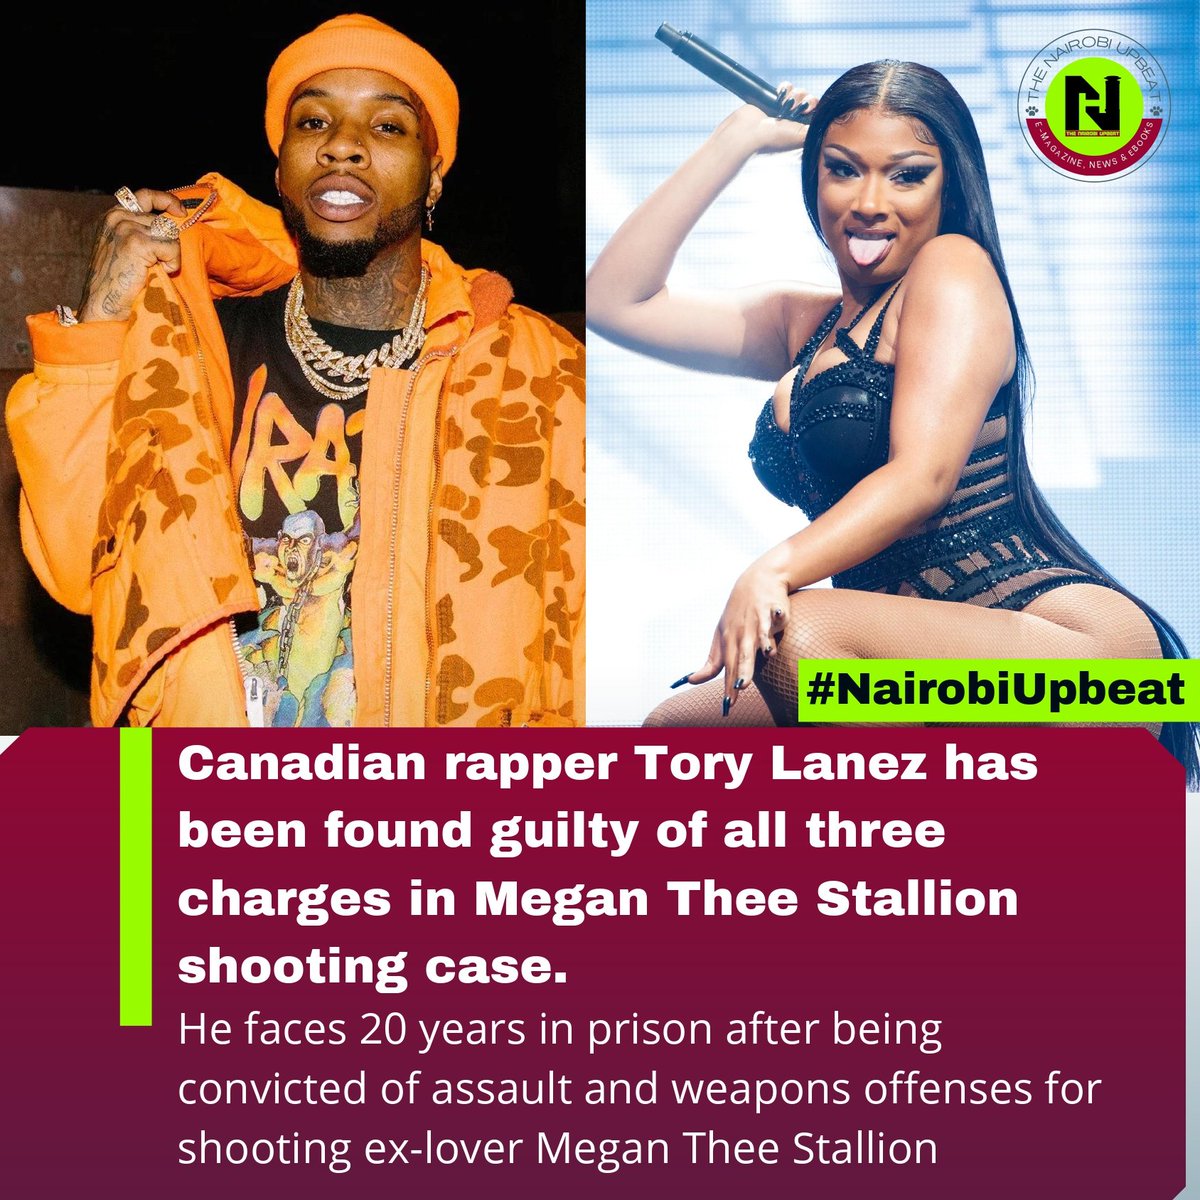 🚨 Canadian rapper Tory Lanez has been found guilty of all three charges in Megan Thee Stallion shooting case. He faces 20 years in prison after being convicted of assault and weapons offenses for shooting ex-lover Megan Thee Stallion‼️👀

#UpbeatXtra #NairobiUpbeat #UpbeatLegal